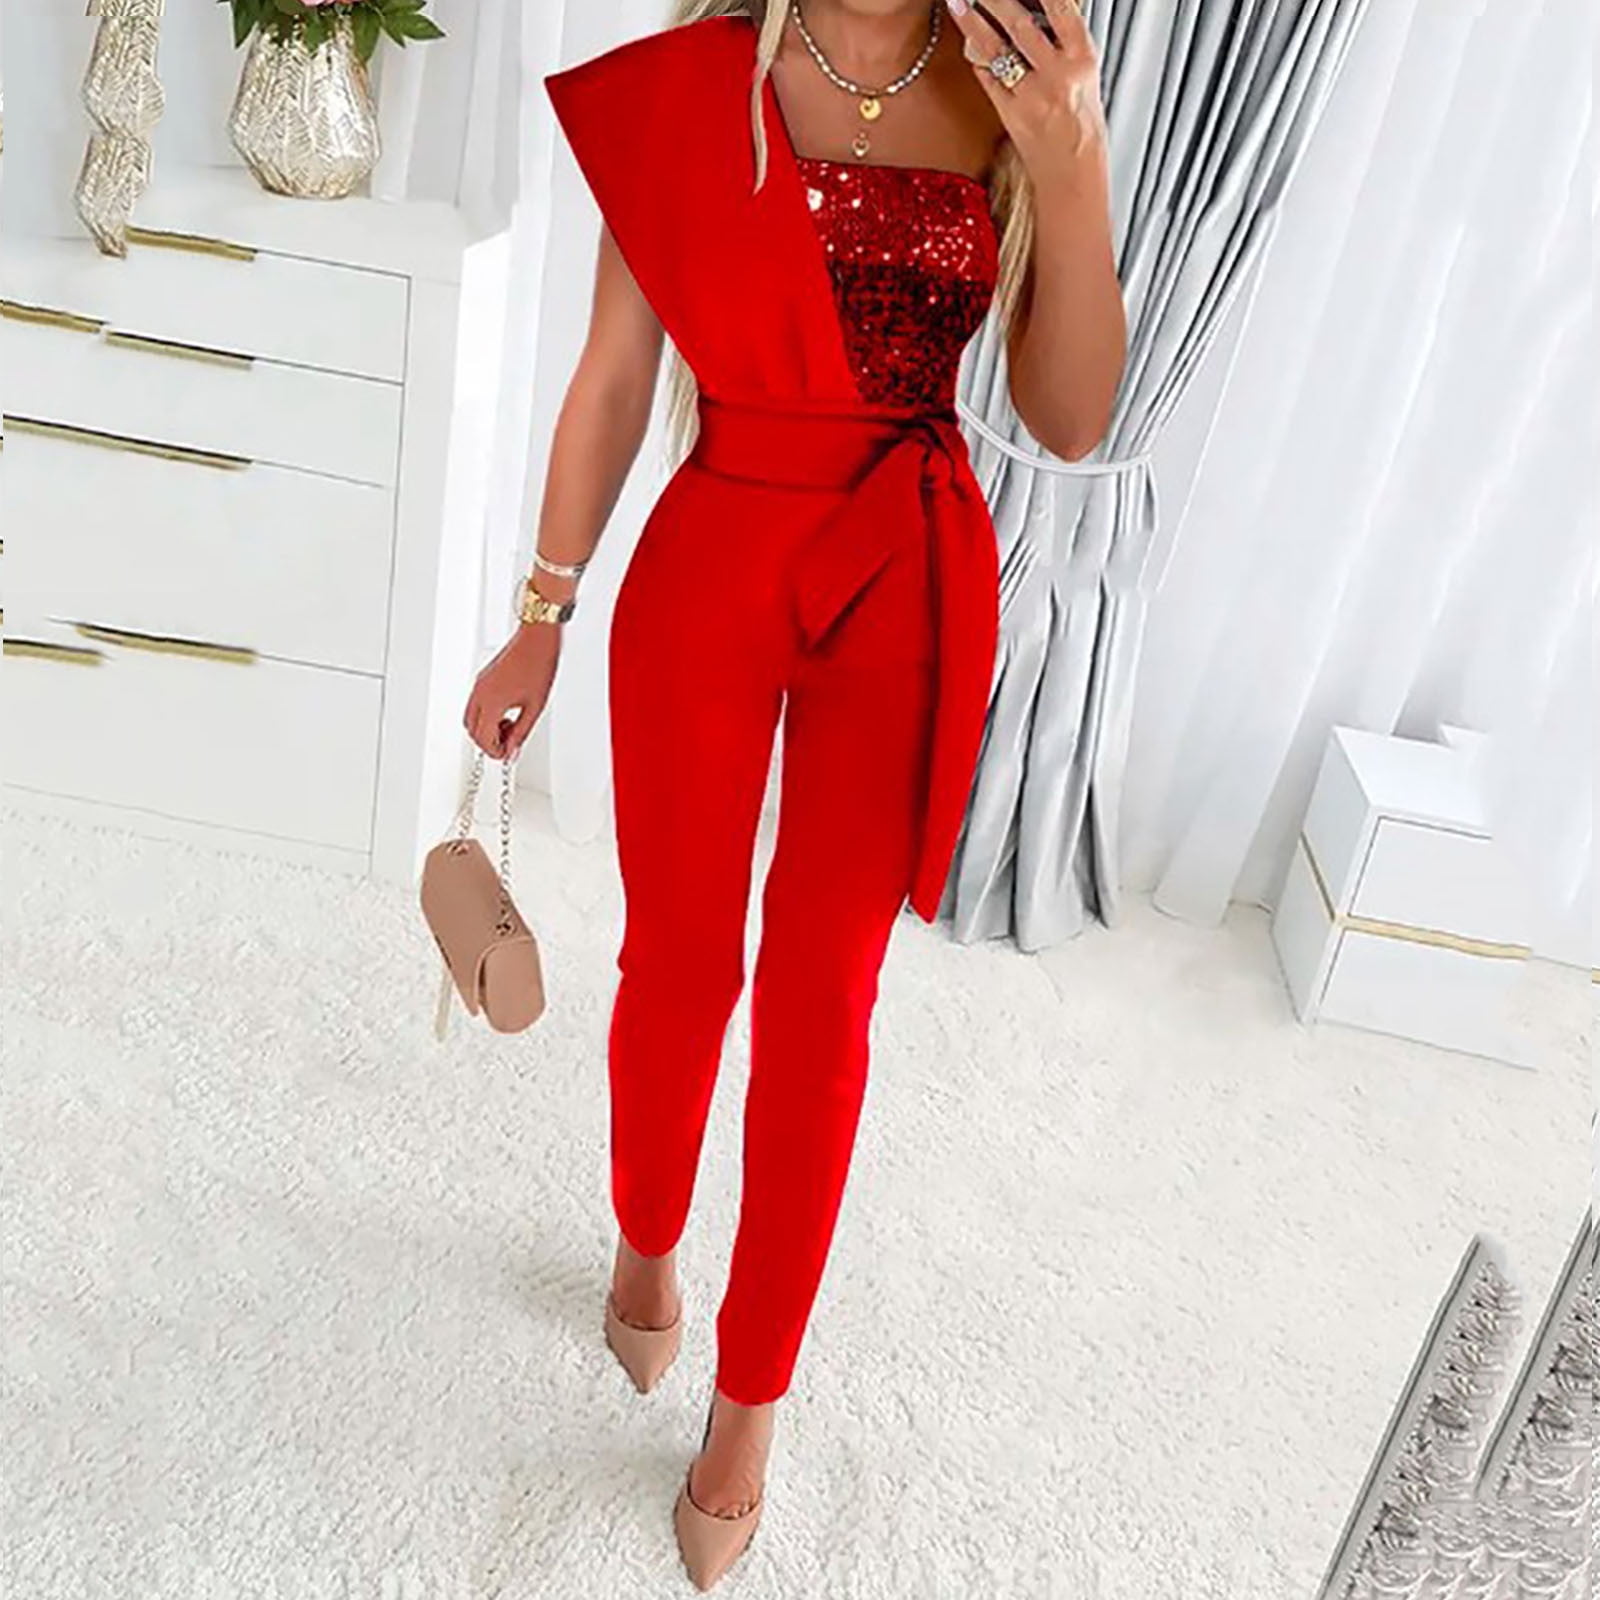 Xysaqa Women's Elegant Off Shoulder Sequin Jumpsuits Summer Party Wedding  Formal High Waist Pants Rompers with Belt